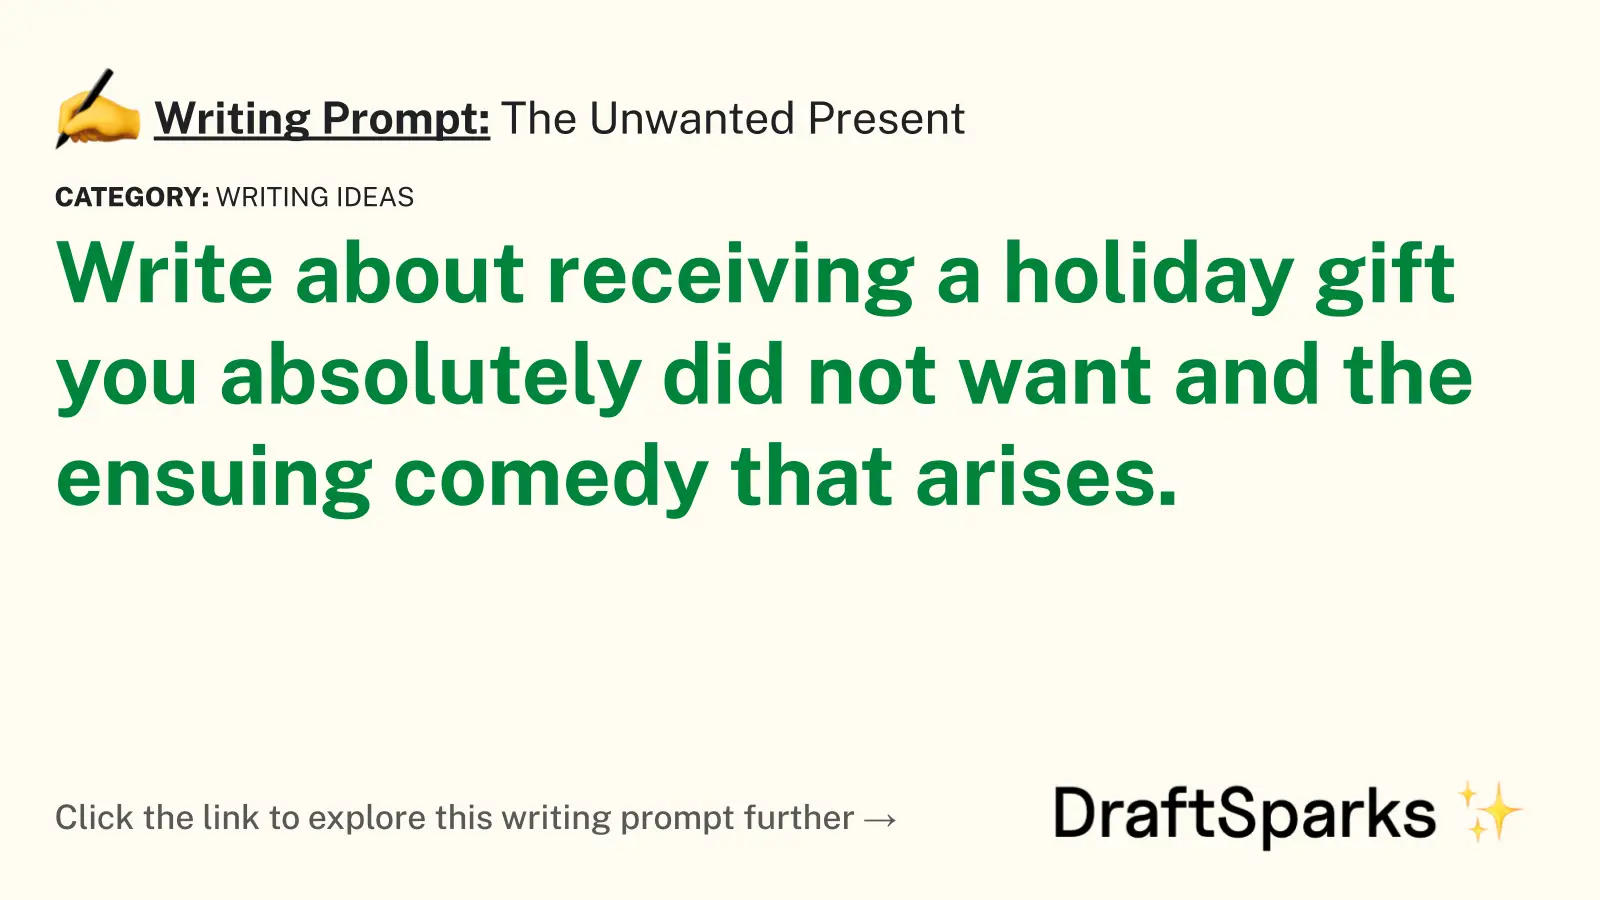 The Unwanted Present